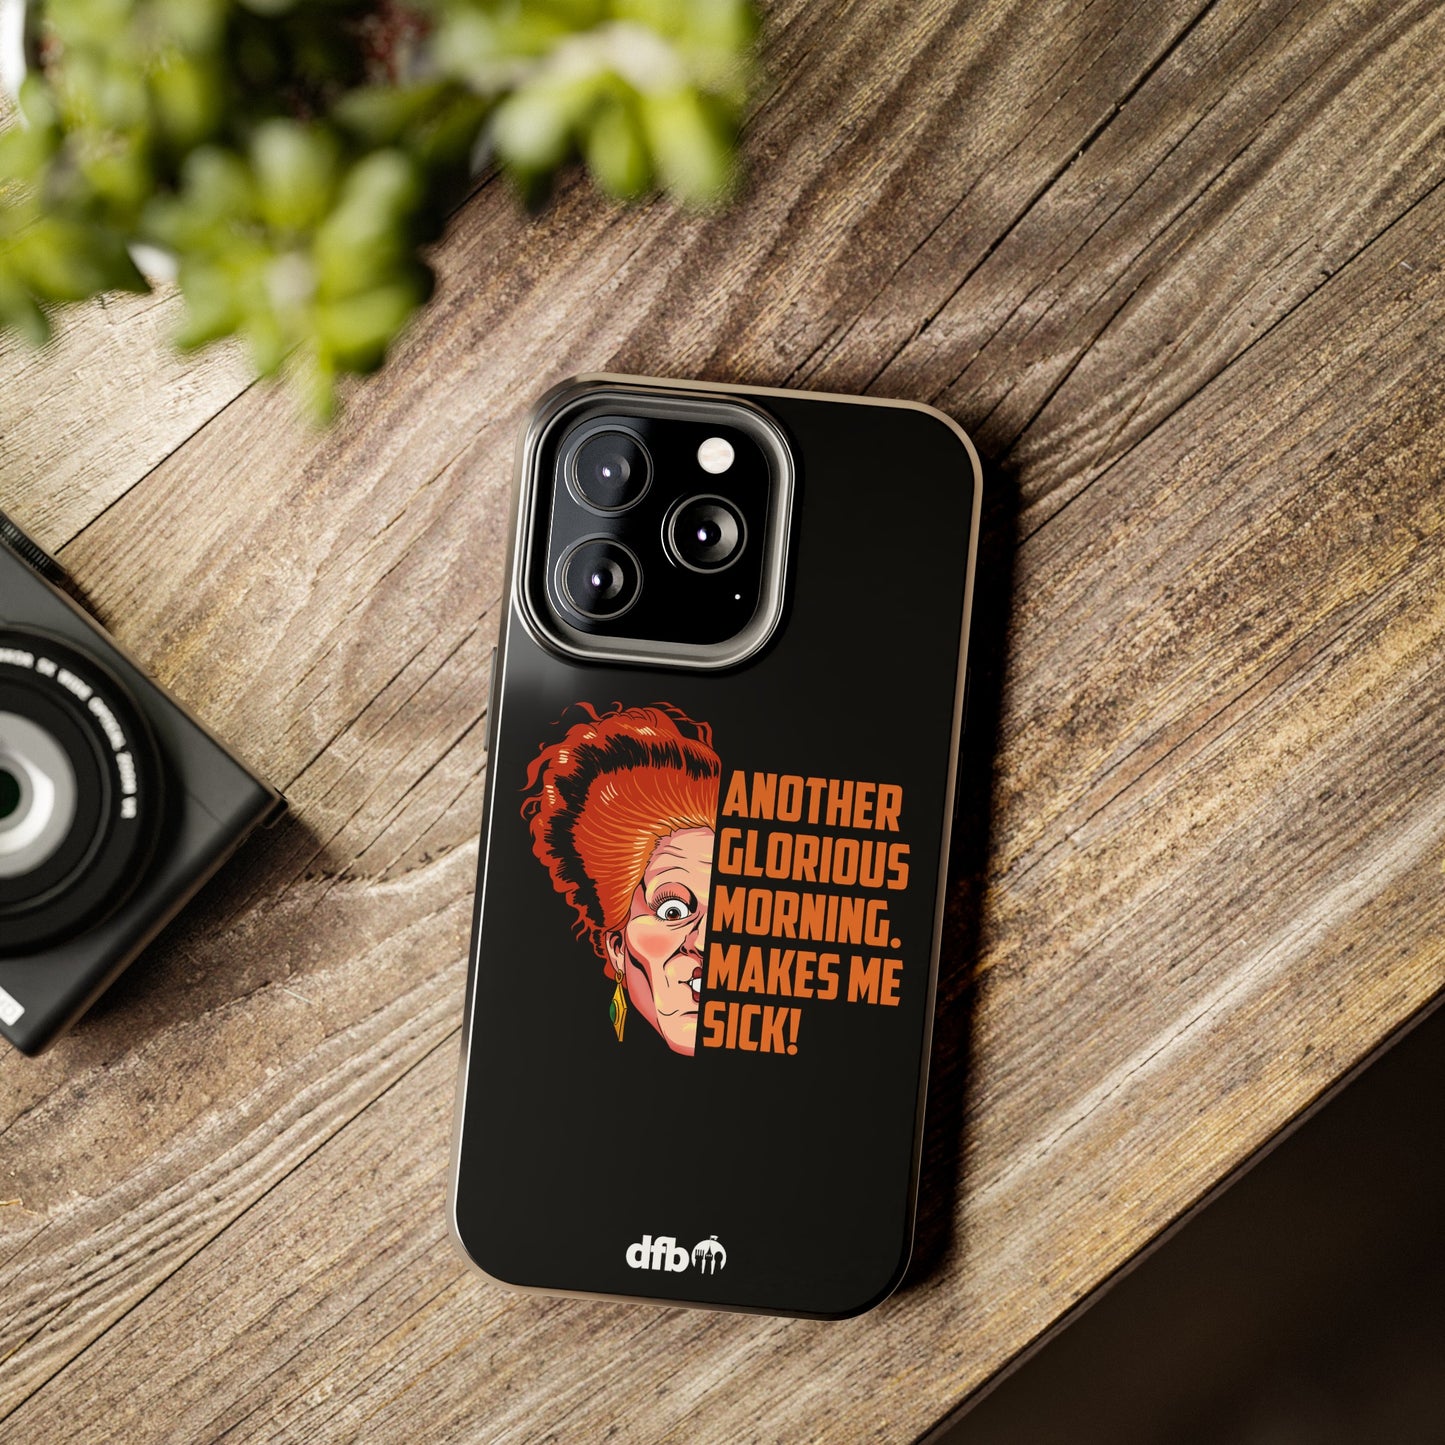 It's Just a Bunch of Hocus Pocus Winifred Sanderson Sisters - Apple Phone Case